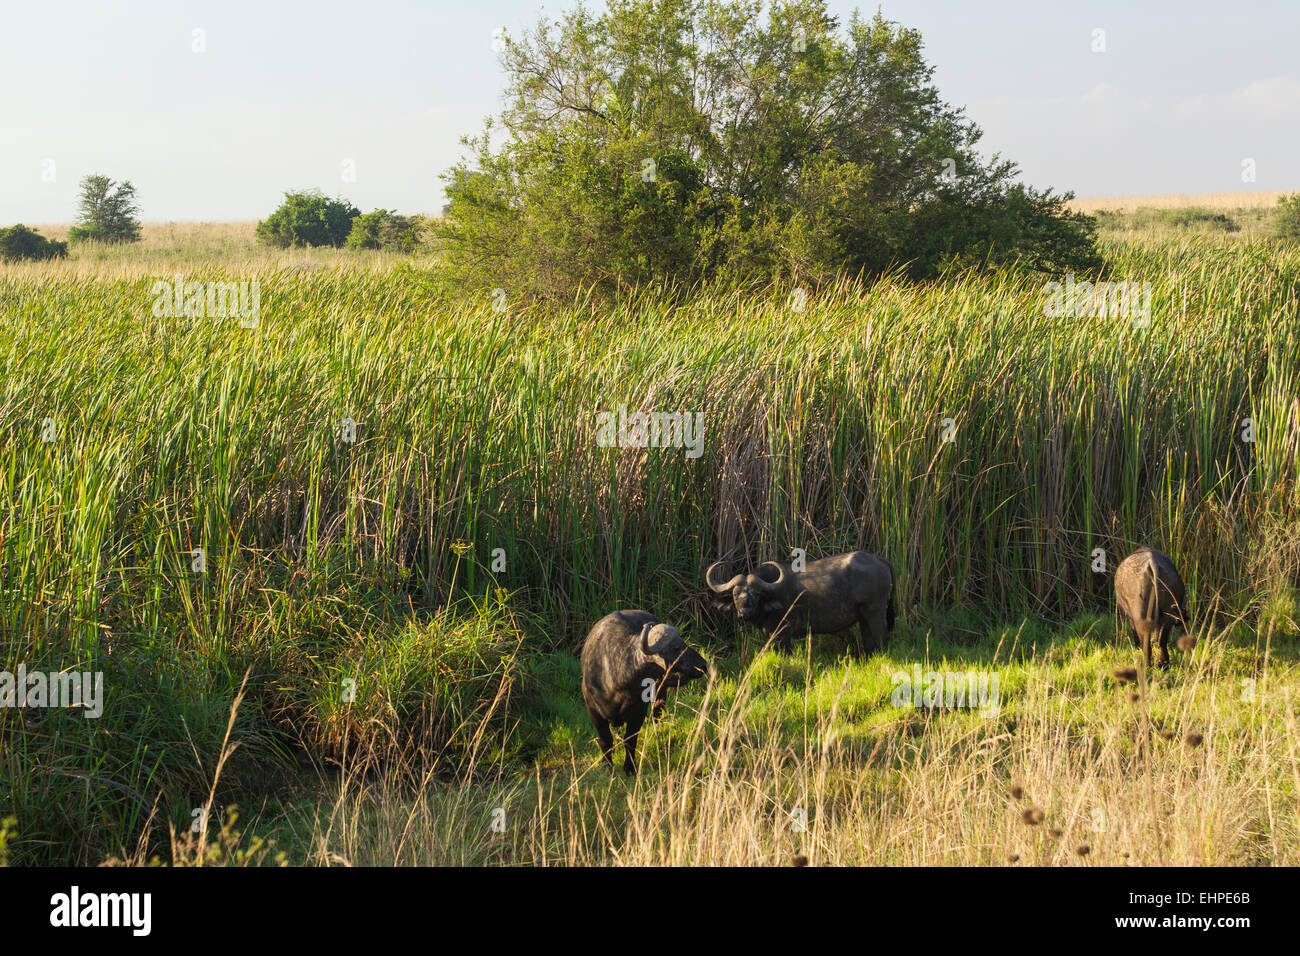 African or Cape, Buffalo (Syncerus caffer) in tall reeds Stock Photo